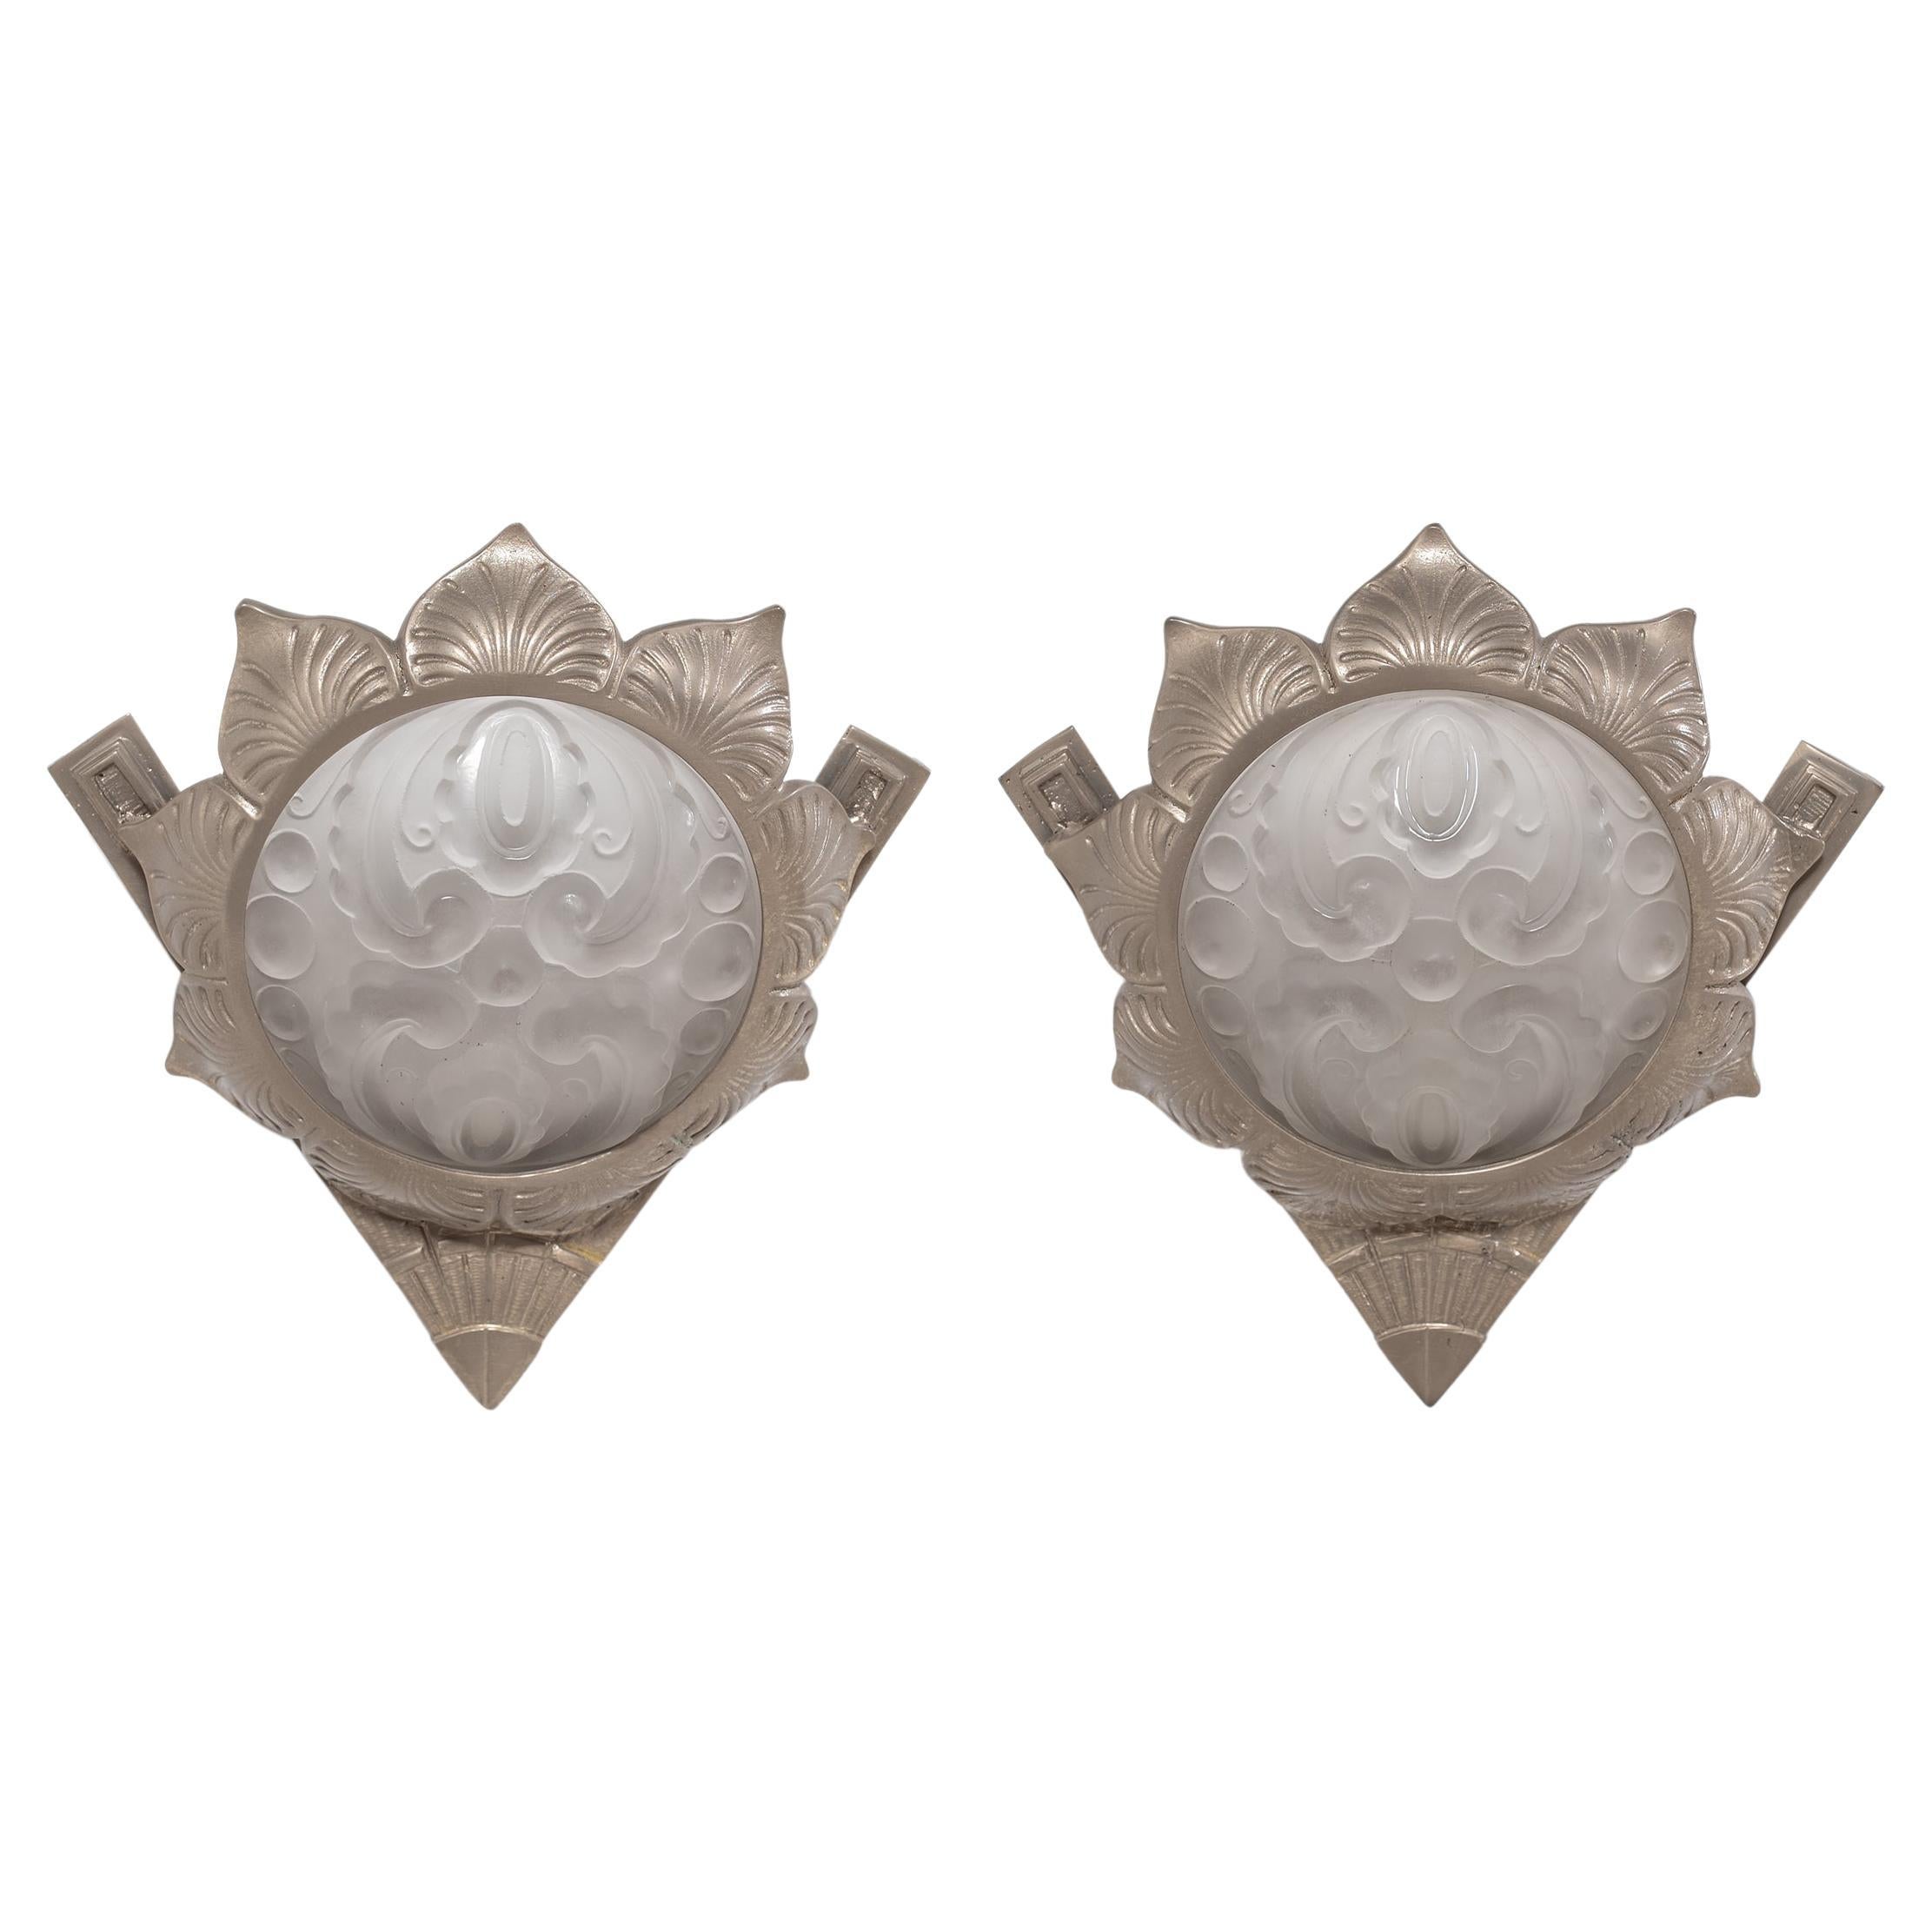 Pair of French Deco Sunflower Wall Sconces, c. 1930